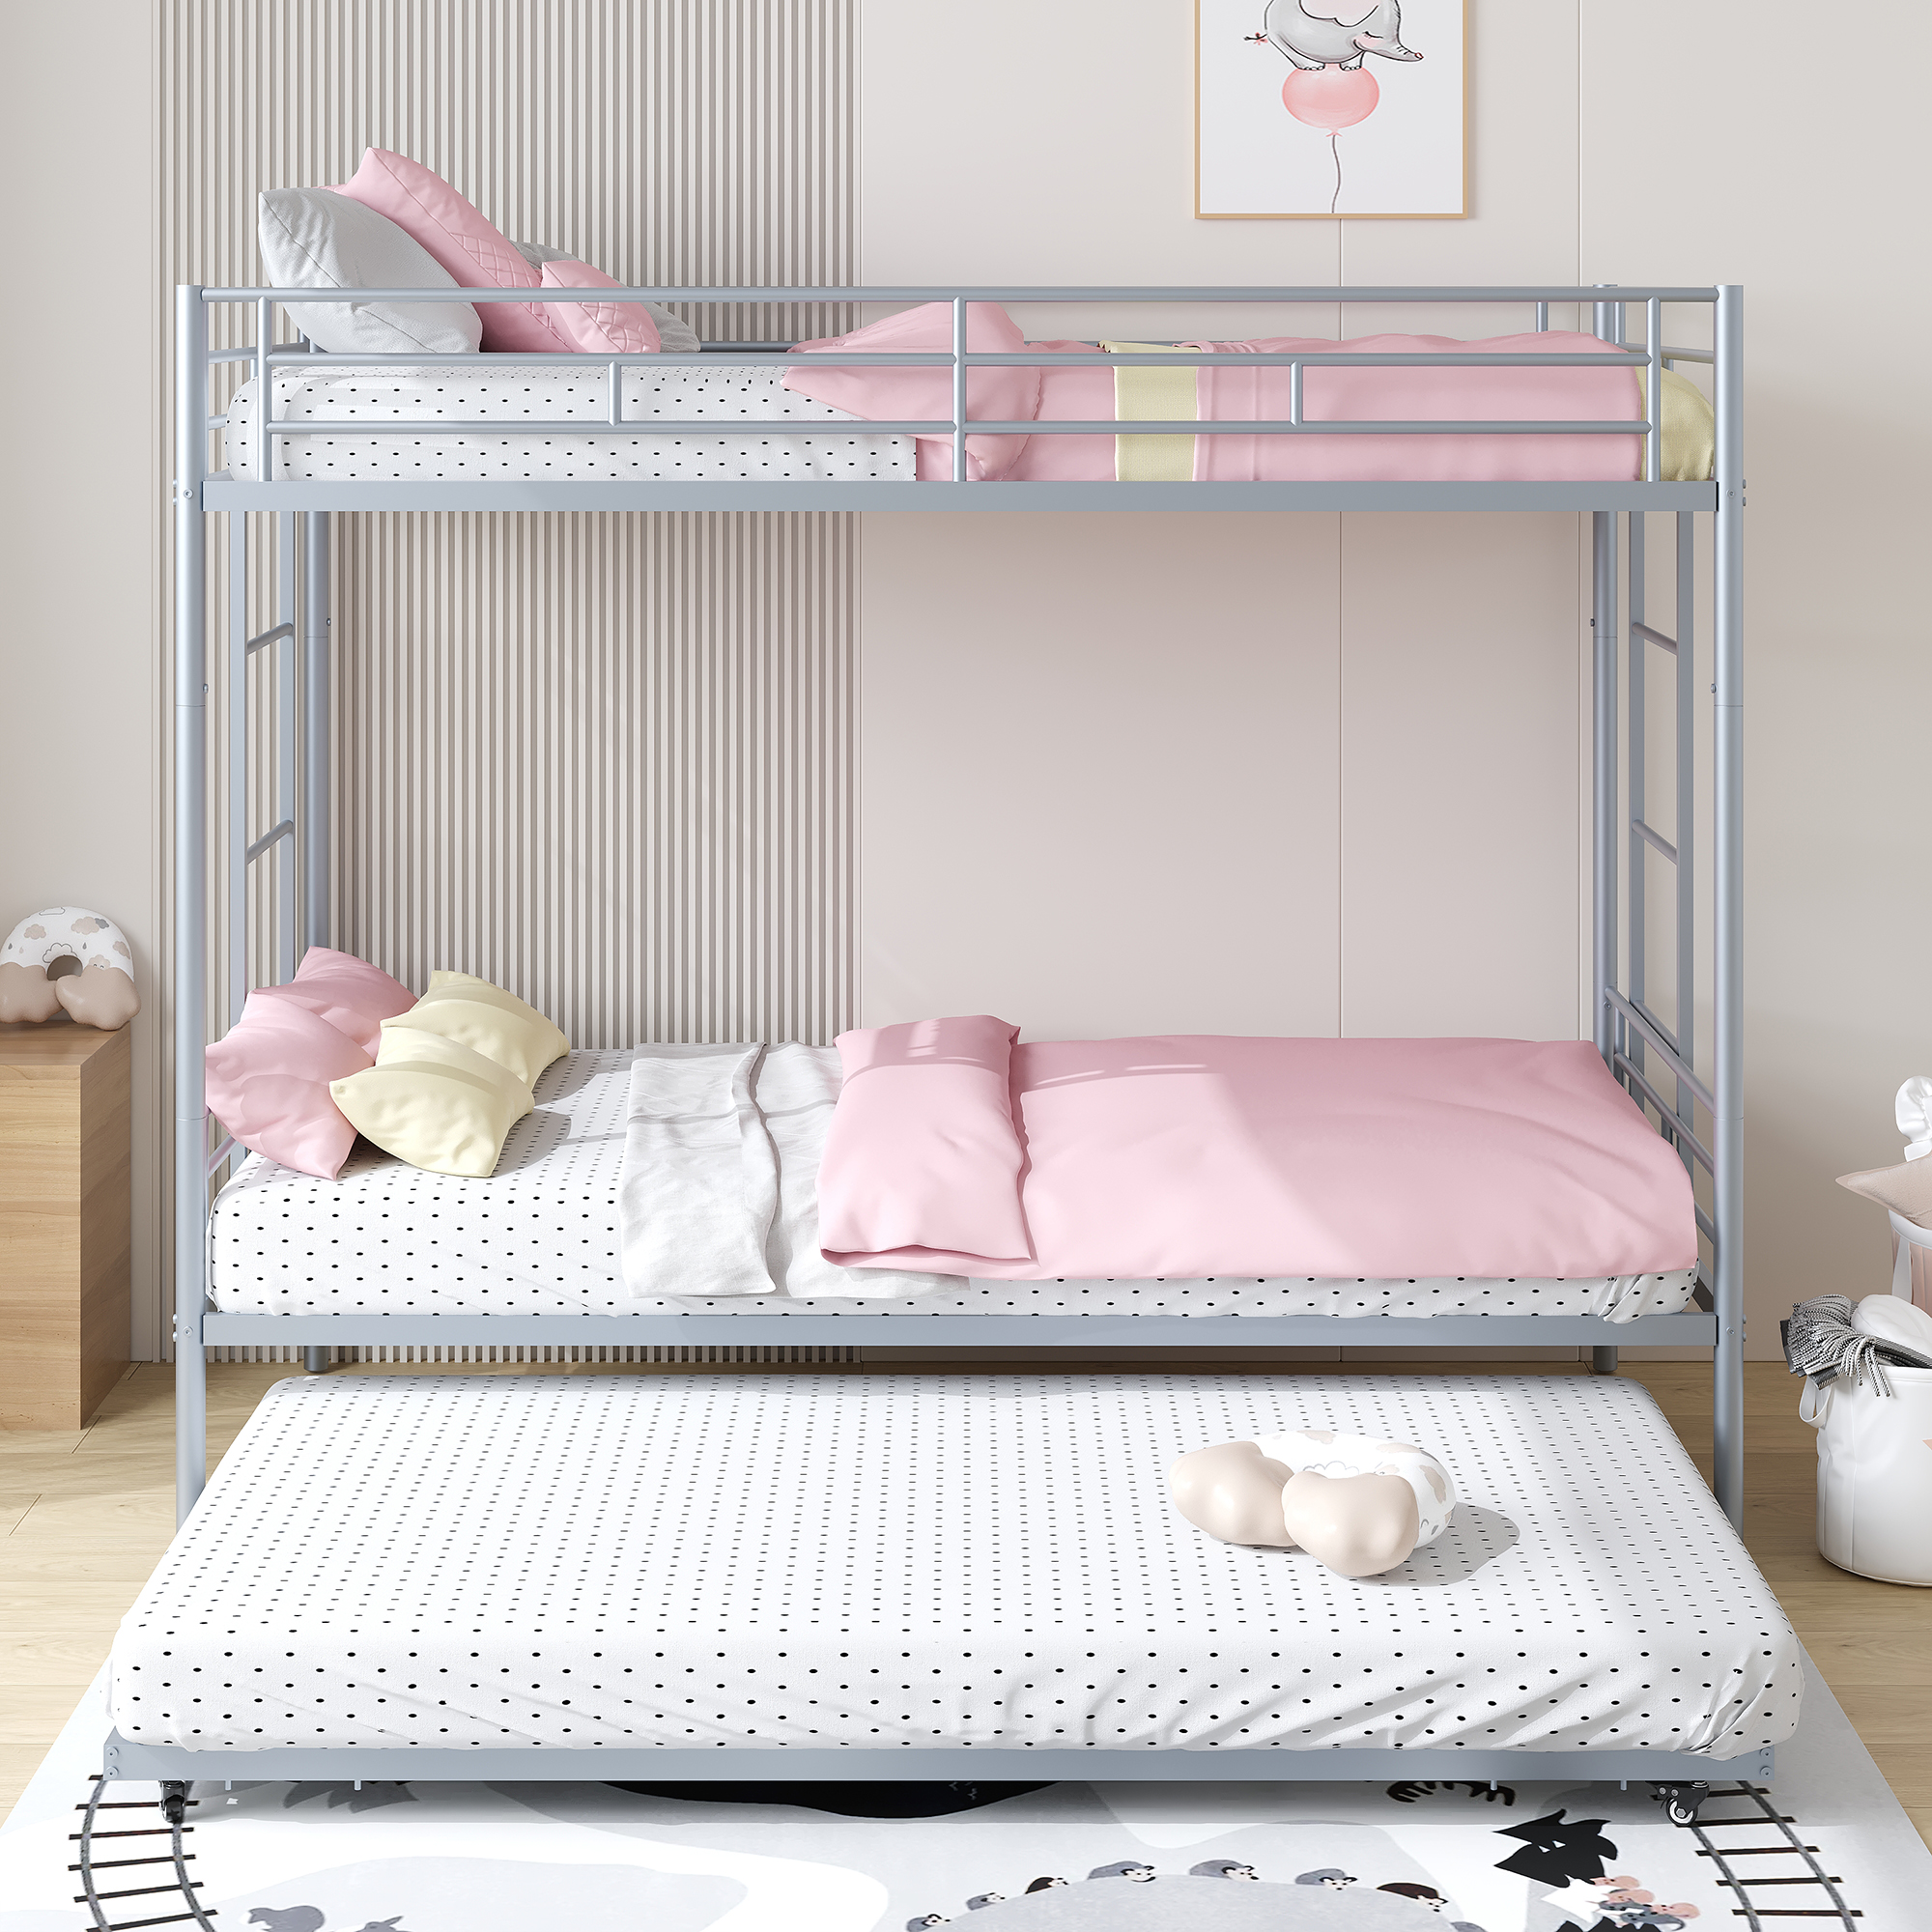 uhomepro Metal Twin Over Twin Bunk Beds with Trundle Bed, Twin Bunk Beds for Kids Adults Teens, Bunk Bed Can Be Divided Into 2 Twin Beds with Trundle, 2 Ladders, No Box Spring Need, Silver - image 3 of 13